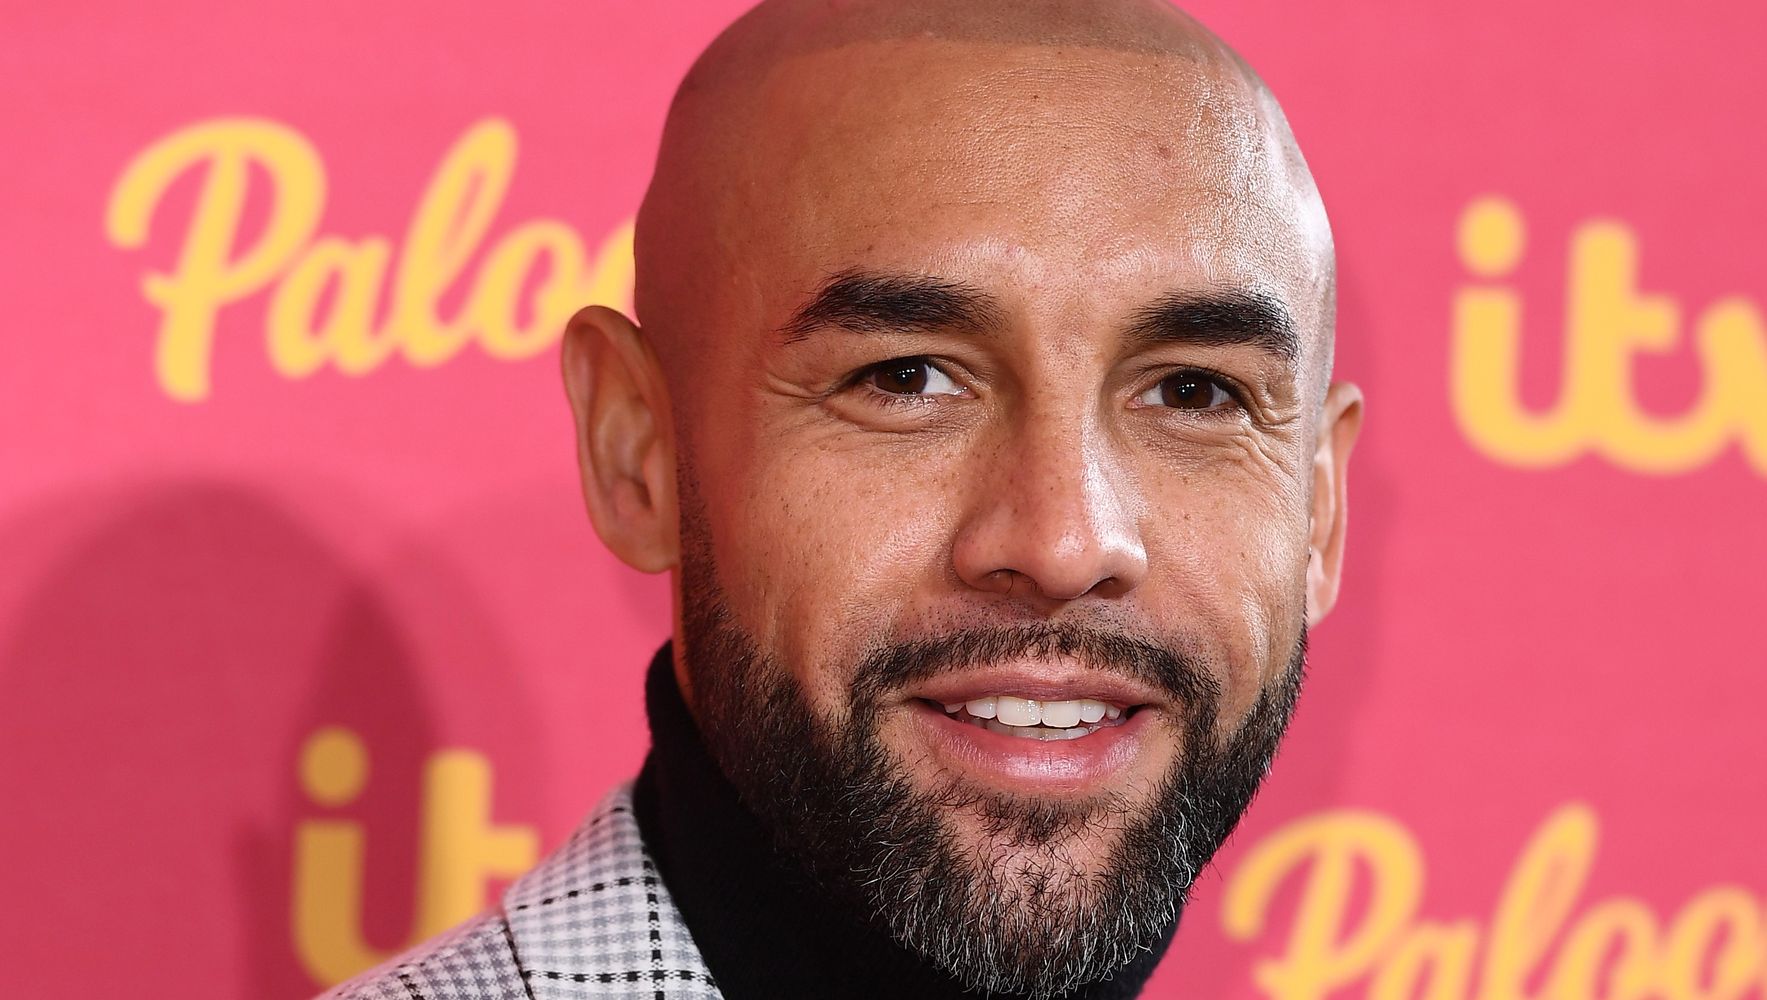 Alex Beresford of Good Morning Britain shares his opinion on the departure of Piers Morgan